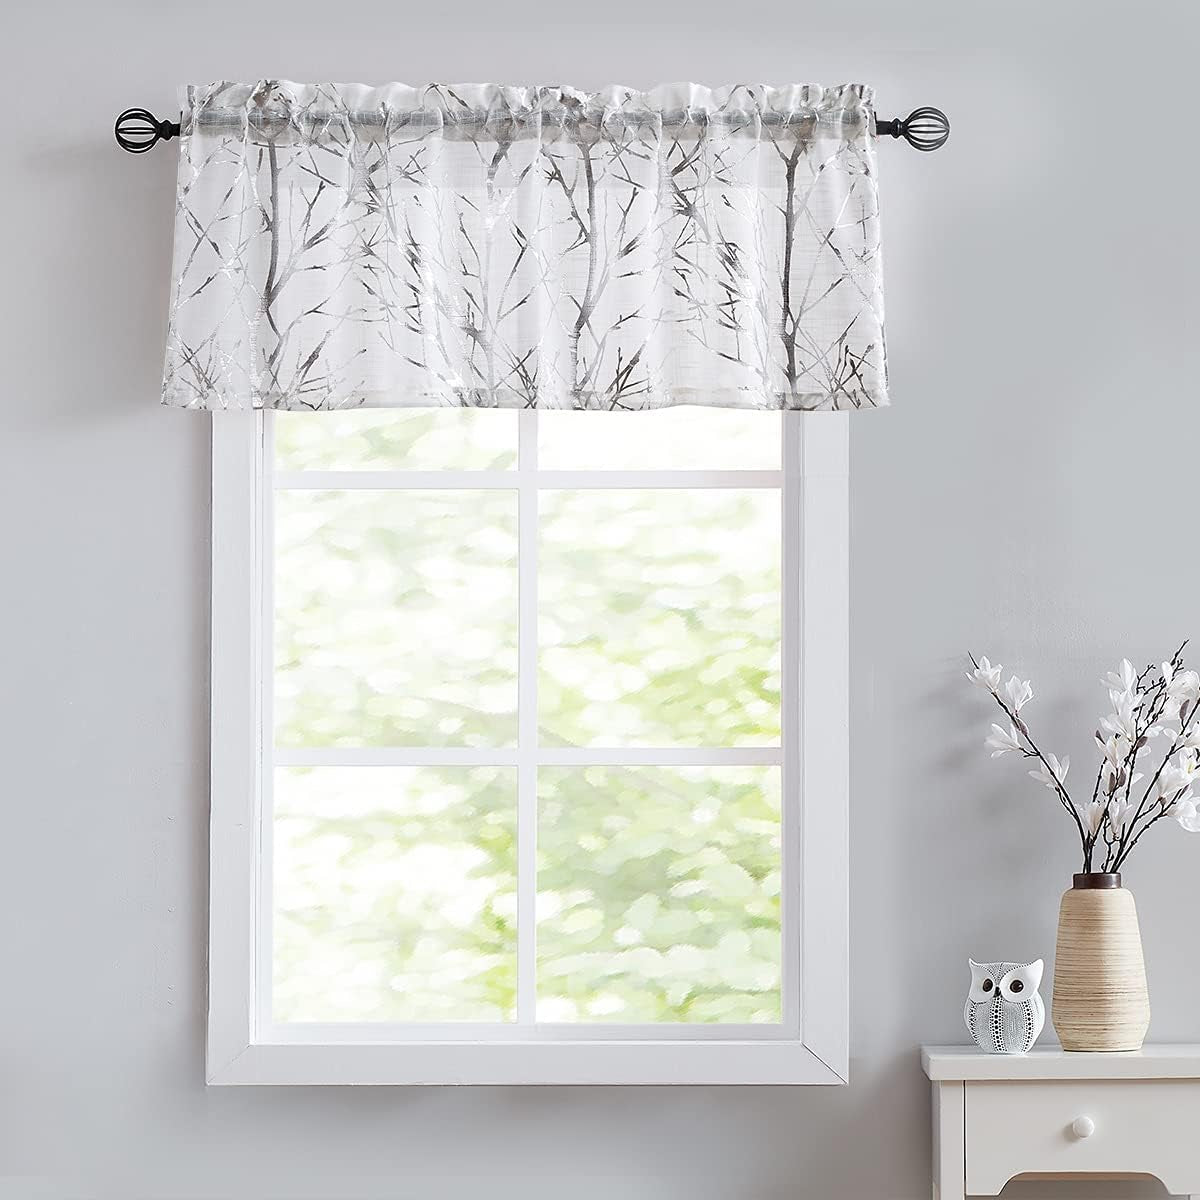 FMFUNCTEX Blue White Curtains for Kitchen Living Room 72“ Grey Tree Branches Print Curtain Set for Small Windows Linen Textured Semi-Sheer Drapes for Bedroom Grommet Top, 2 Panels  Fmfunctex Semi-Sheer: White + Foil Silver 50" X 18" 1Pc 